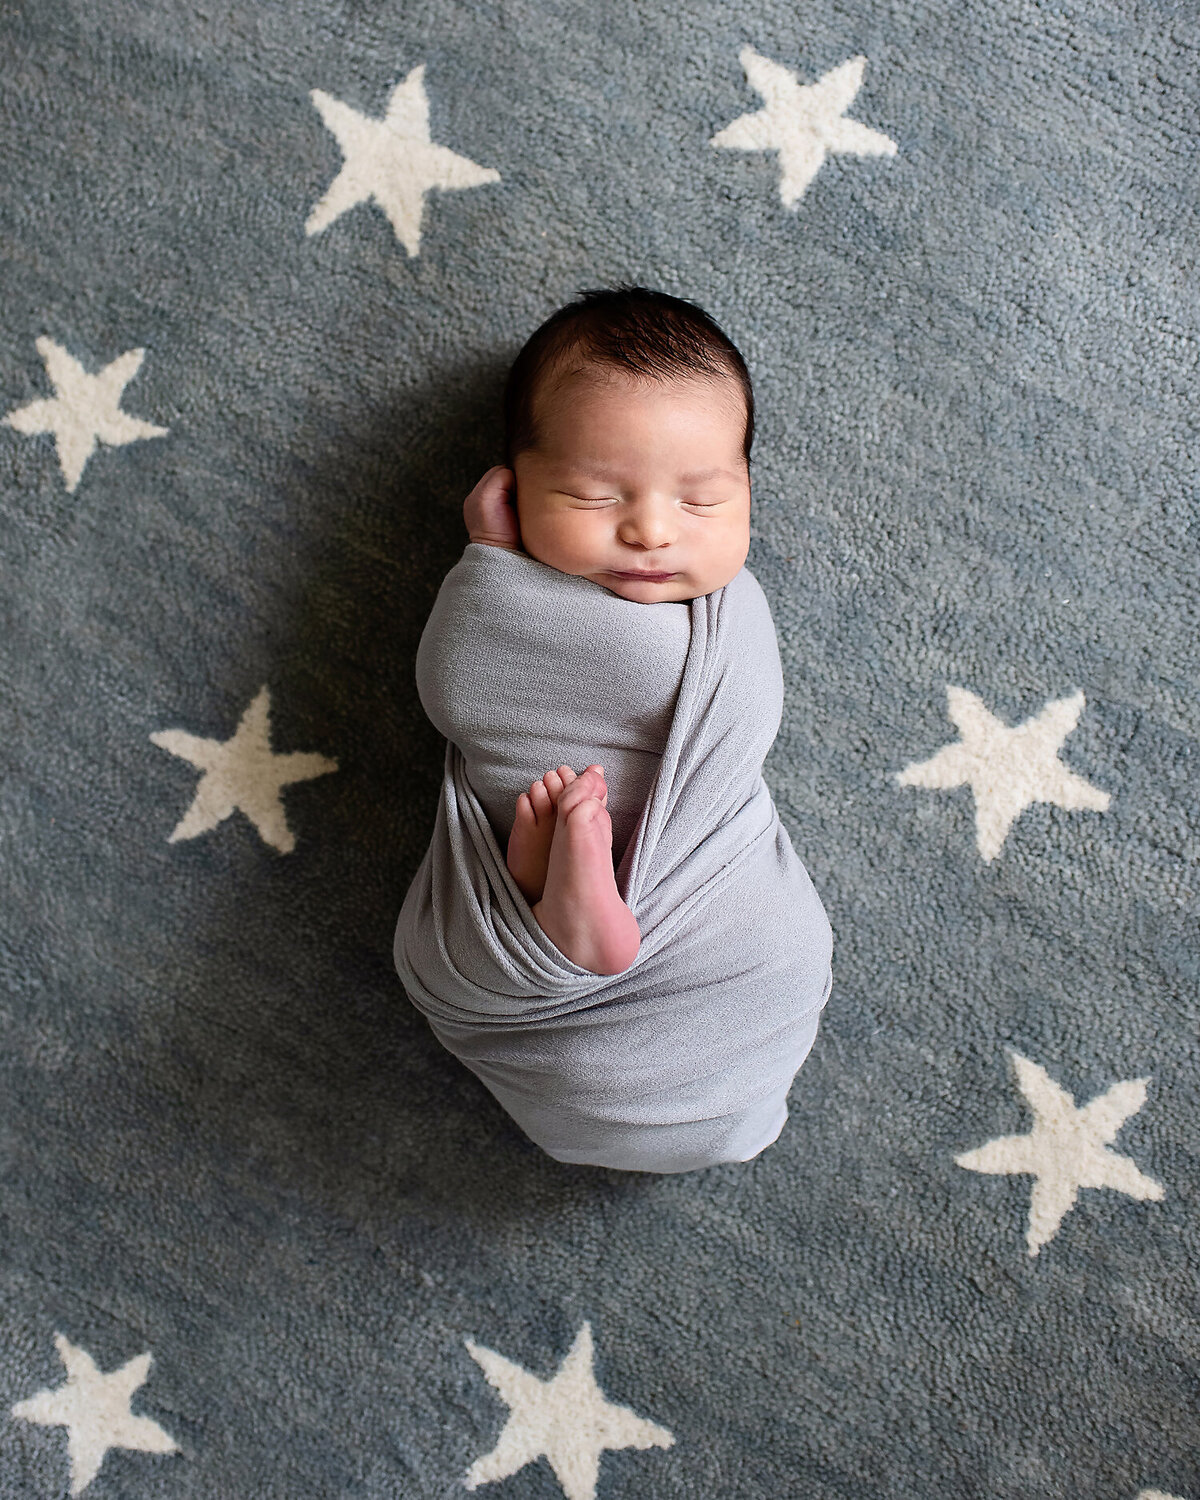 Newborn boy wrapped in a blue/gray swaddle laying on a rug with white stars in his newborn nursery.